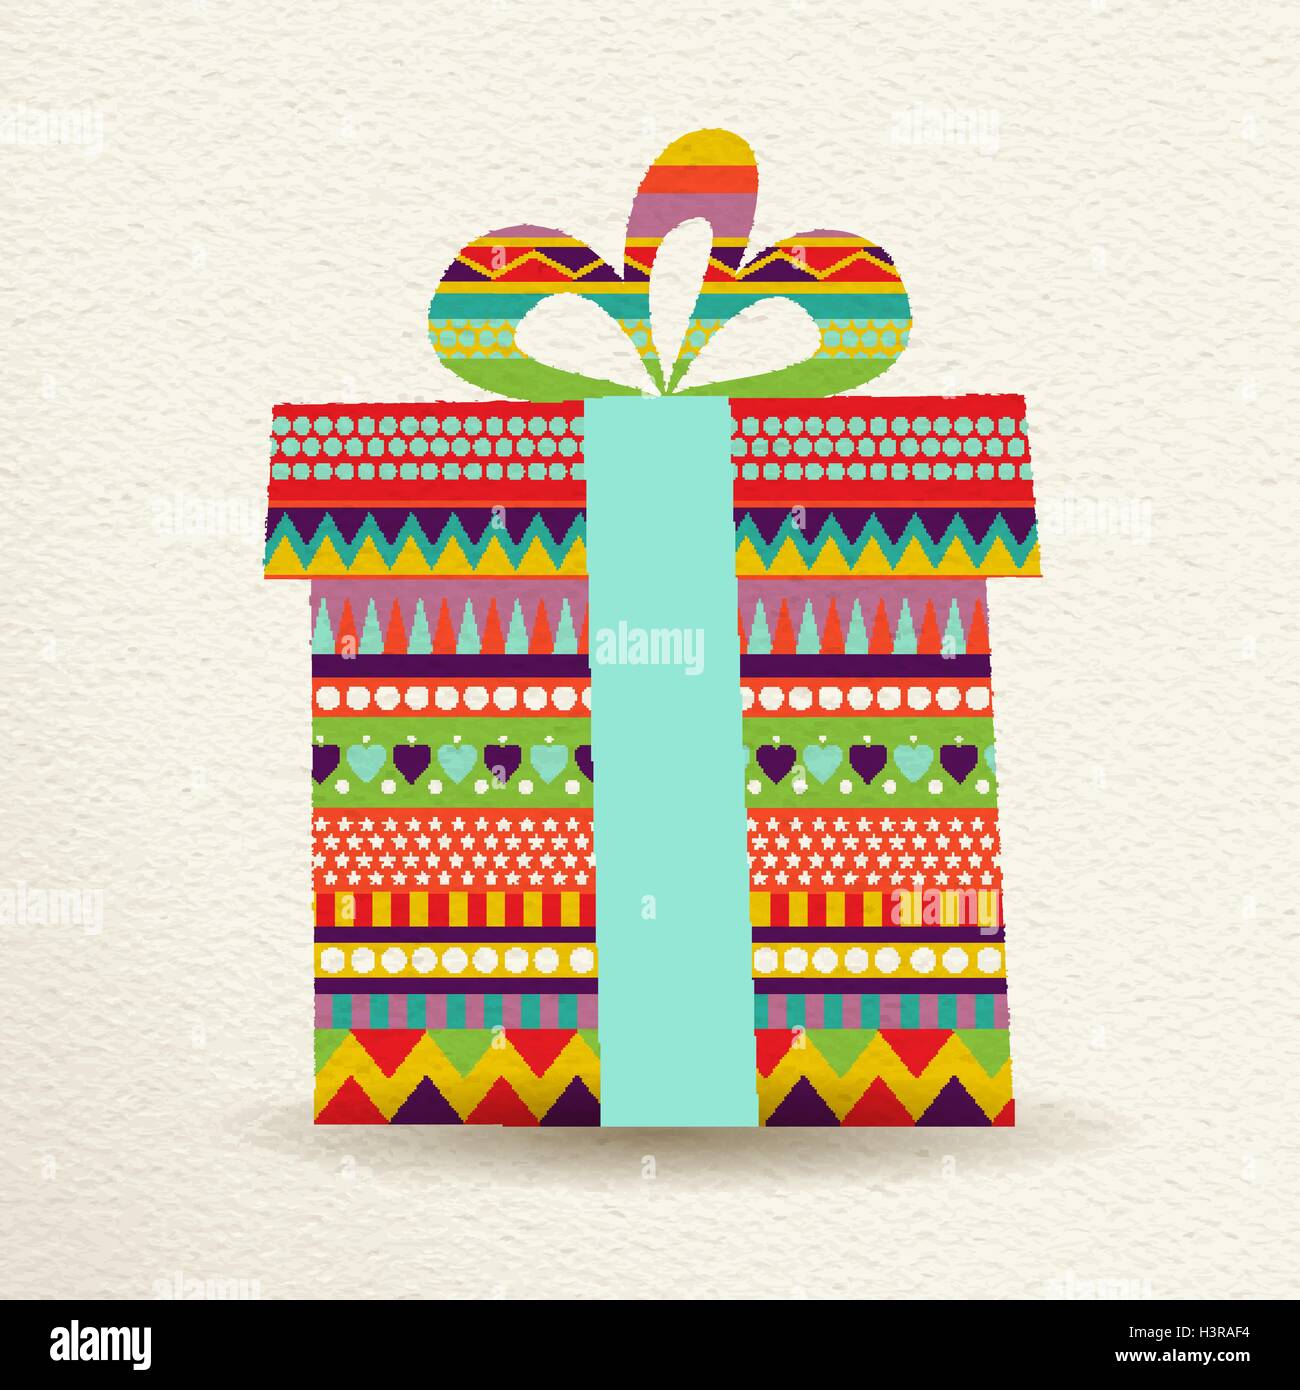 Merry Christmas gift design in fun happy colors with geometric shapes and stripes, concept holiday illustration. EPS10 vector. Stock Vector